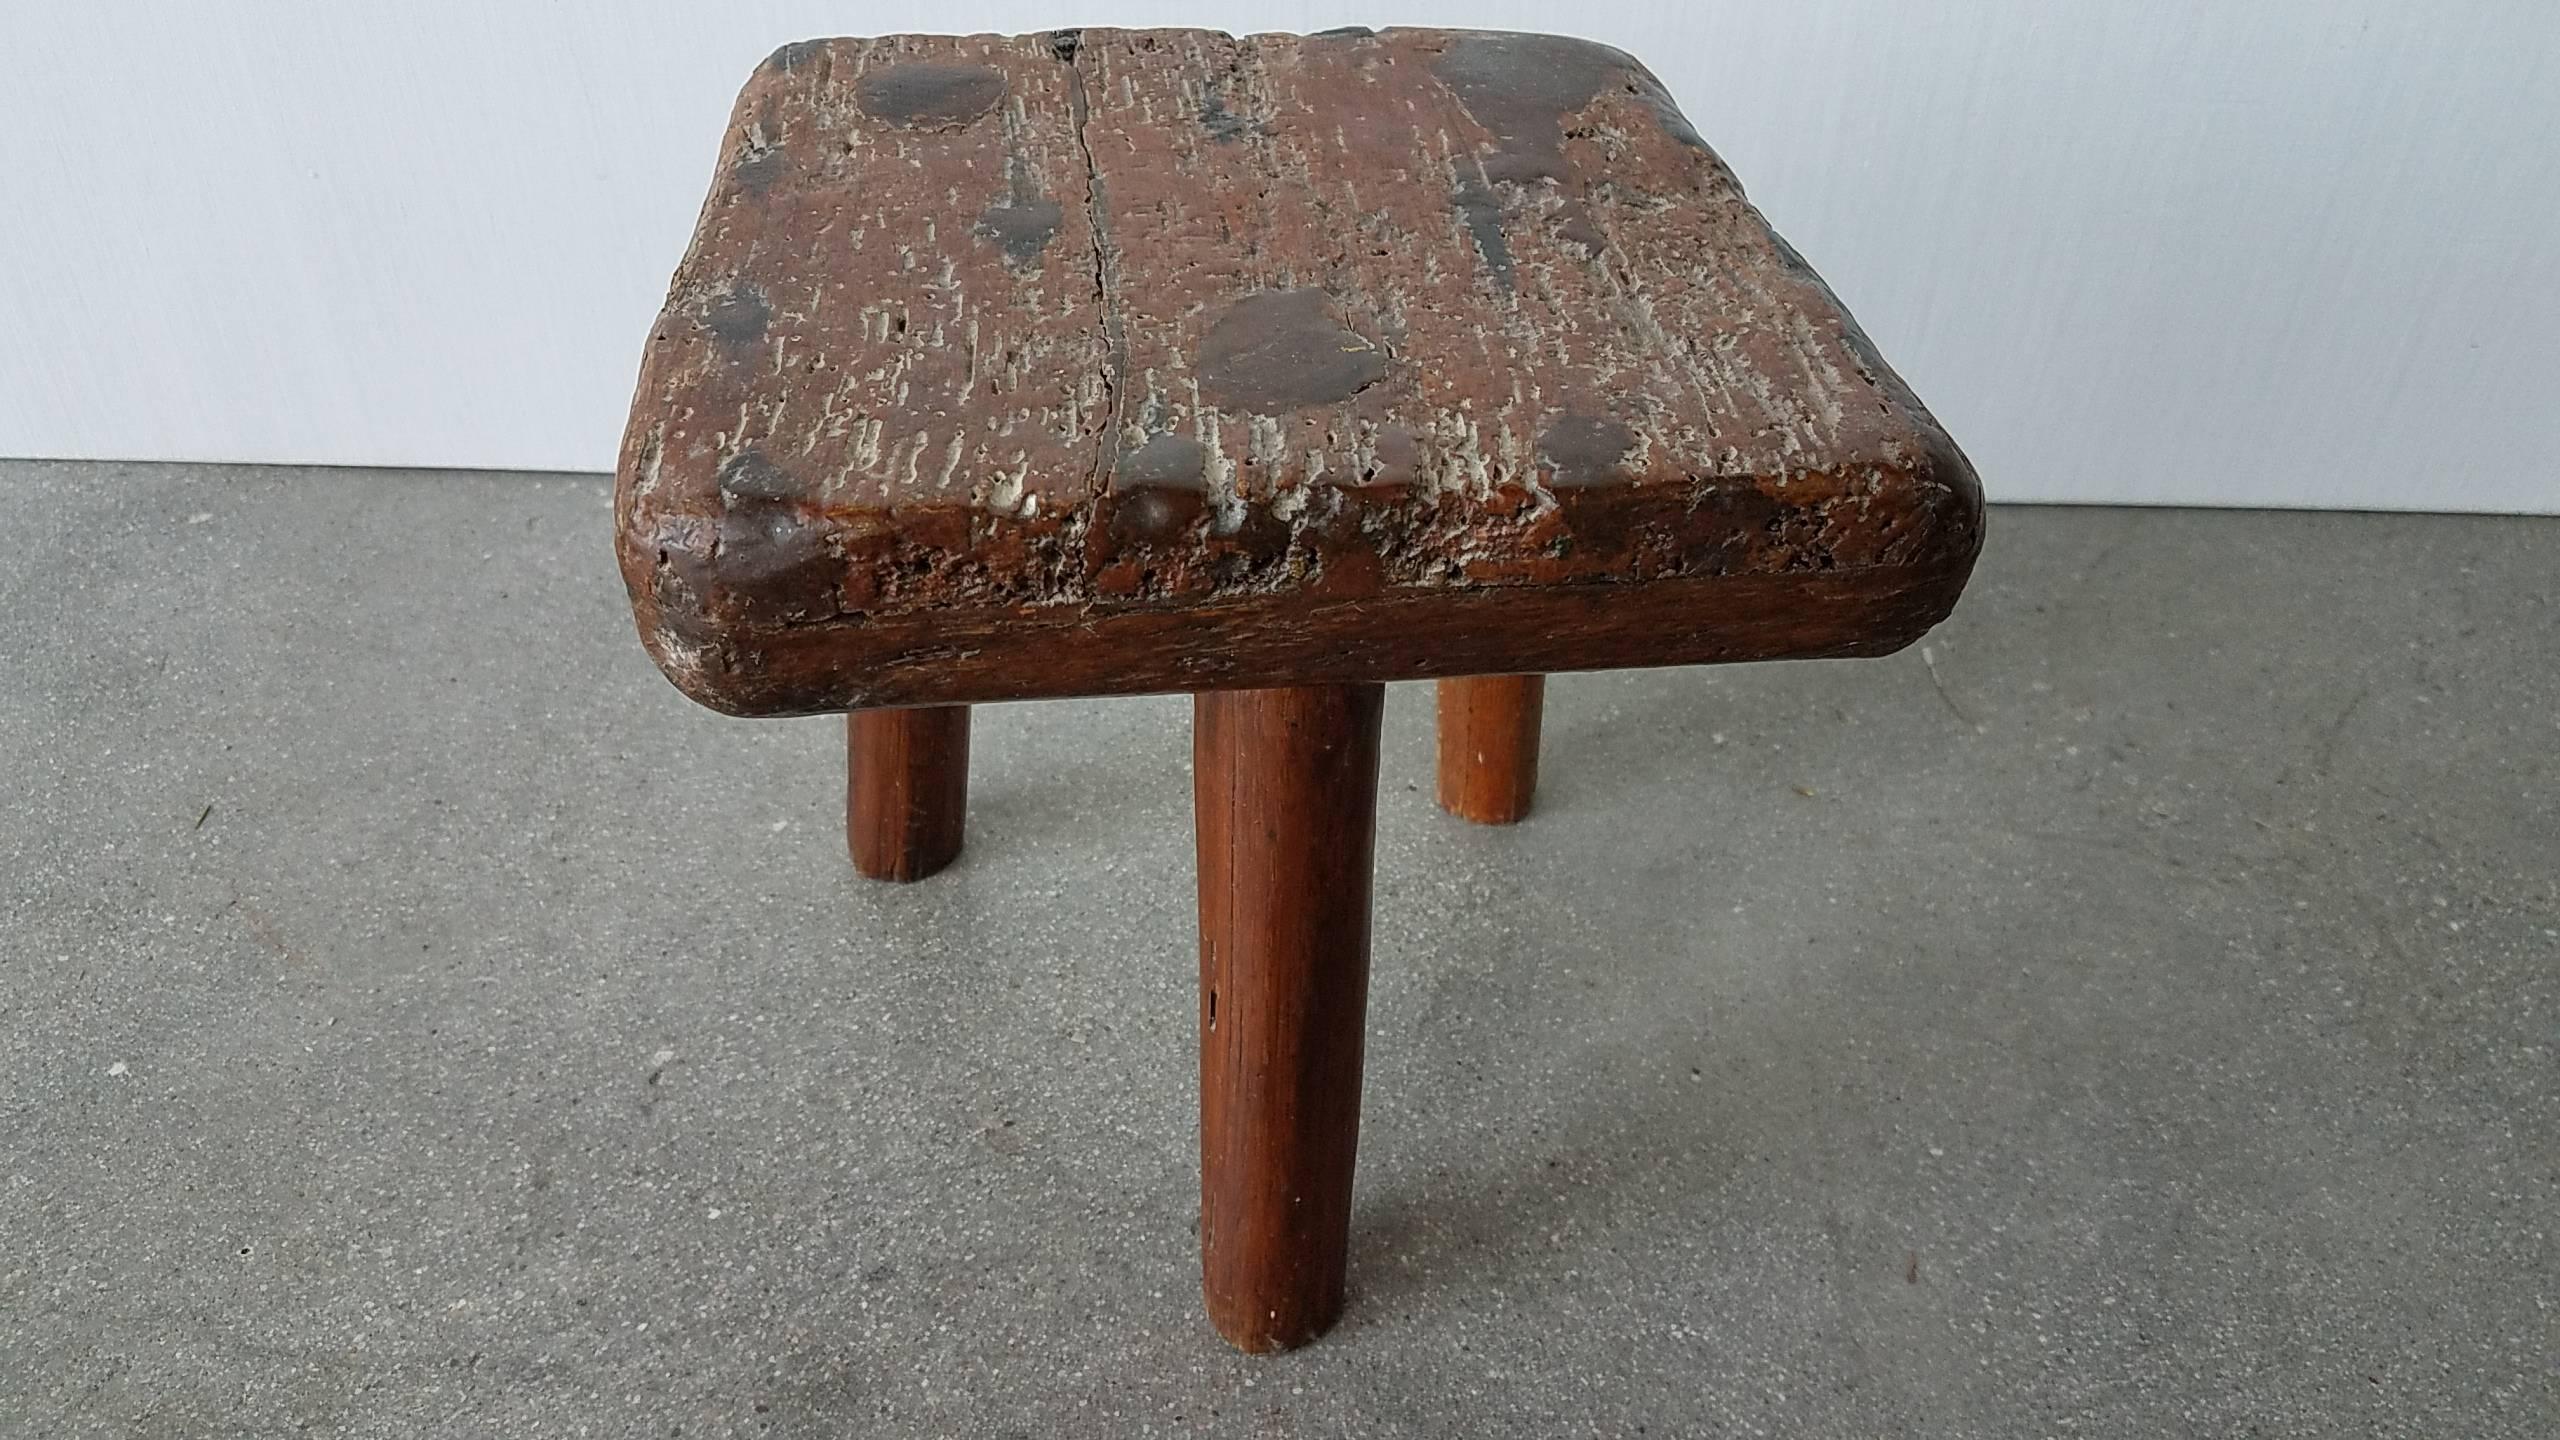 This antique little milking stool has such amazing patina on the top and the wood underneath is absolutely beautiful. Inscribed on the bottom as well as typed into a small tag attached to the stool, as found, stating that the stool is gifted